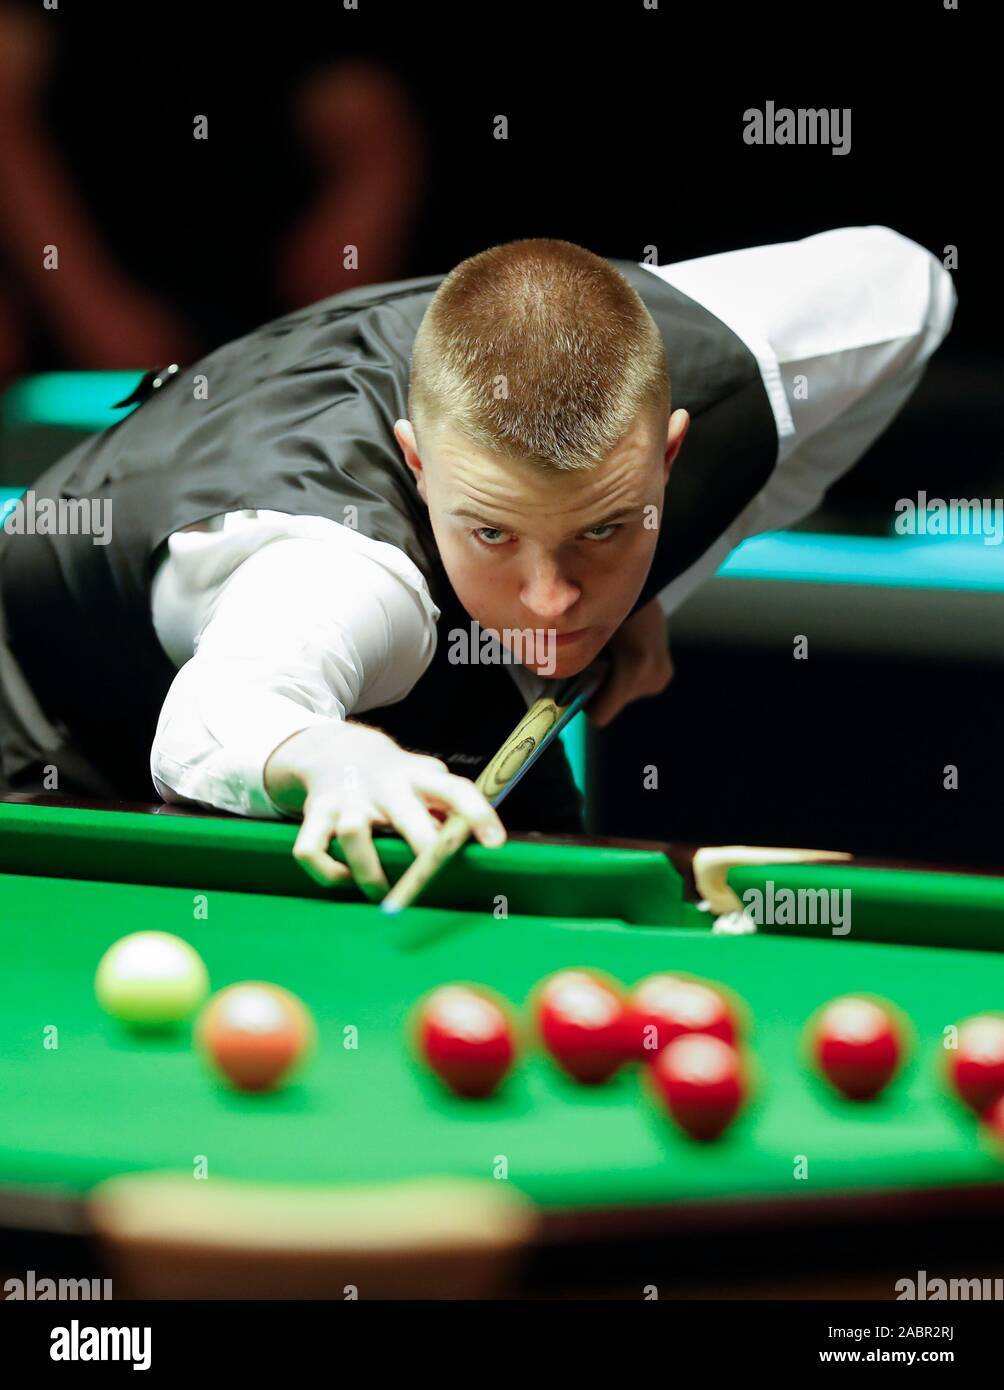 York. 28th Nov, 2019. Ross Bulman of Ireland competes during the Snooker UK Championship 2019 first round match with Ronnie OSullivan of England in York, Britain on Nov